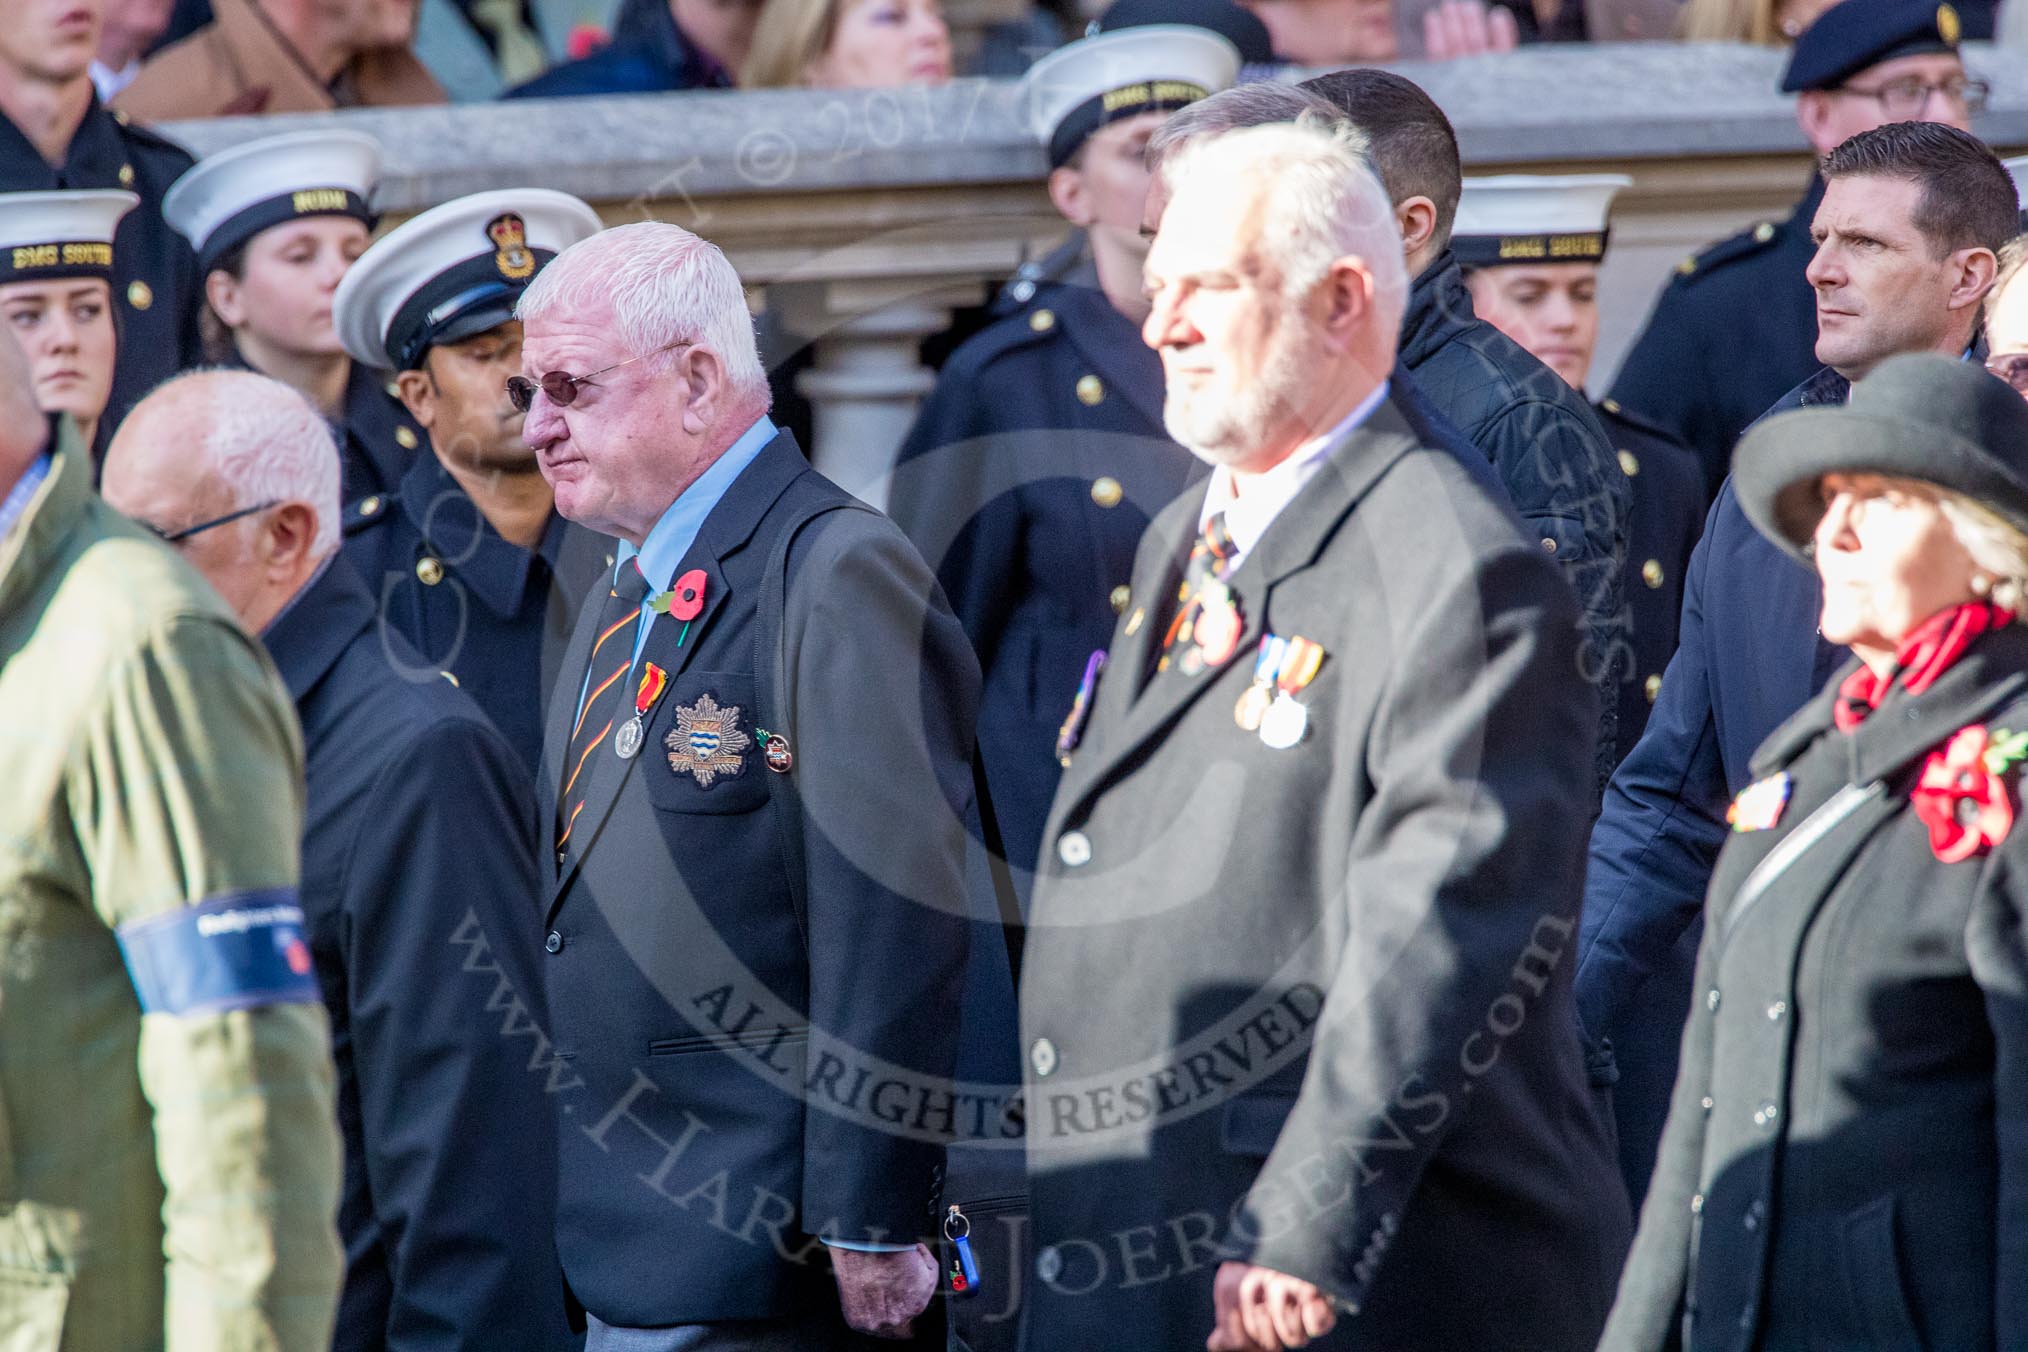 The Firefighters Memorial Trust (Group M16, 25 members) during the Royal British Legion March Past on Remembrance Sunday at the Cenotaph, Whitehall, Westminster, London, 11 November 2018, 12:26.